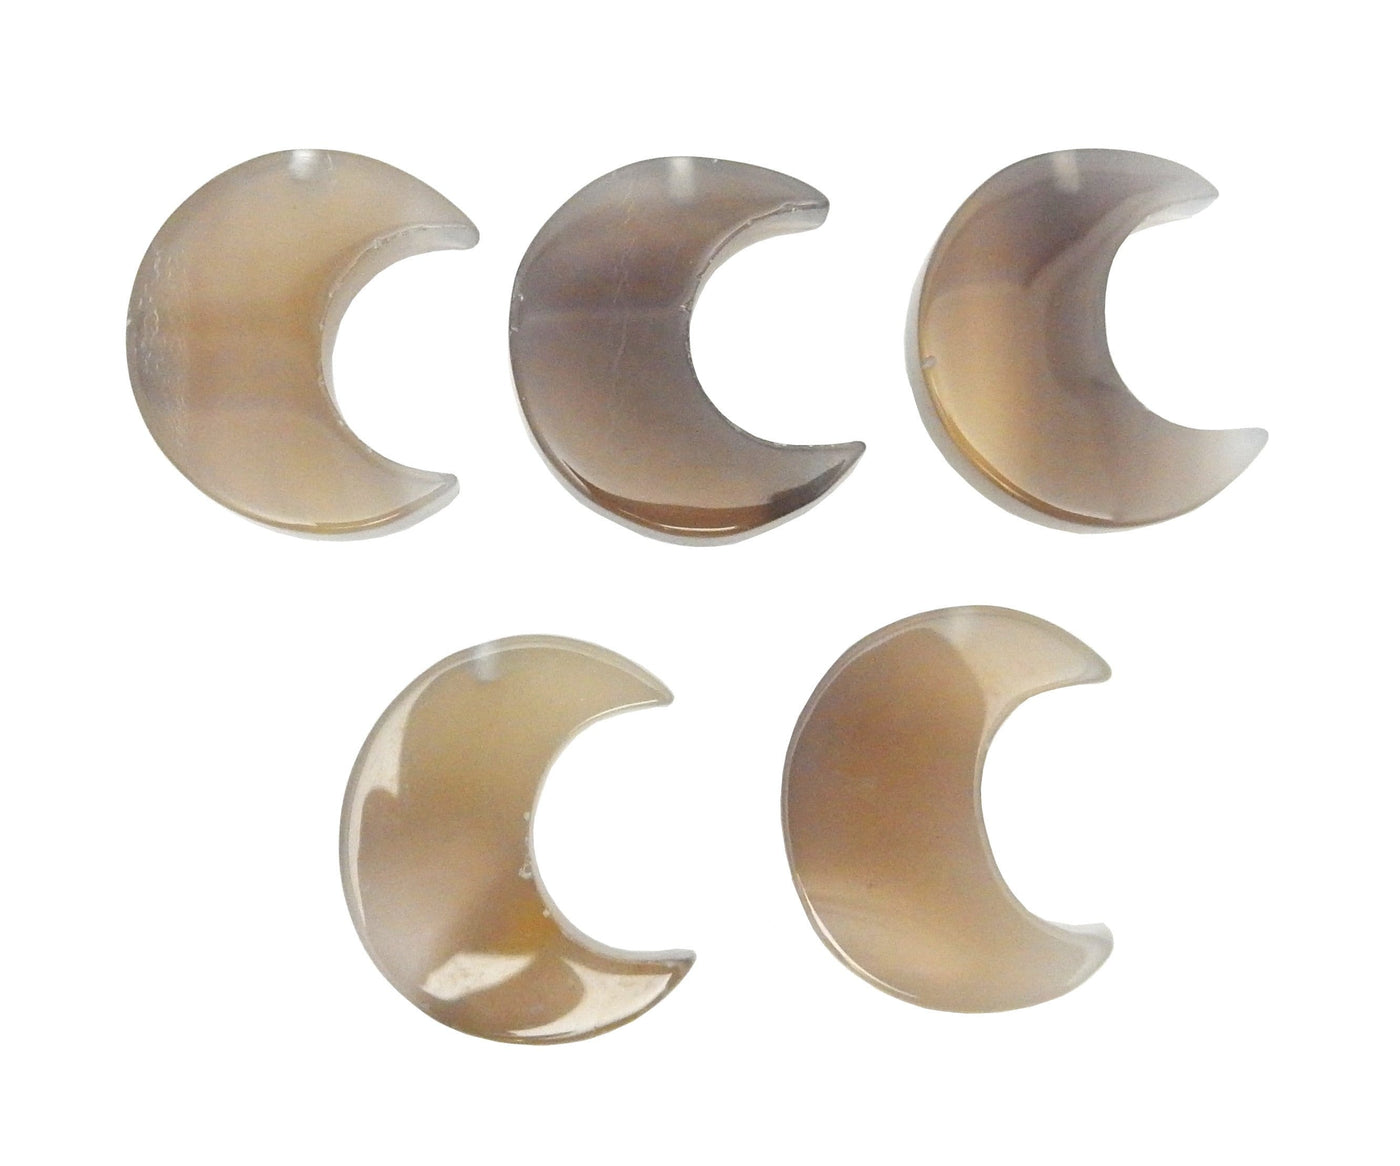 Five Chalcedony Half Crescent Moons - Drilled, displayed on a white surface.